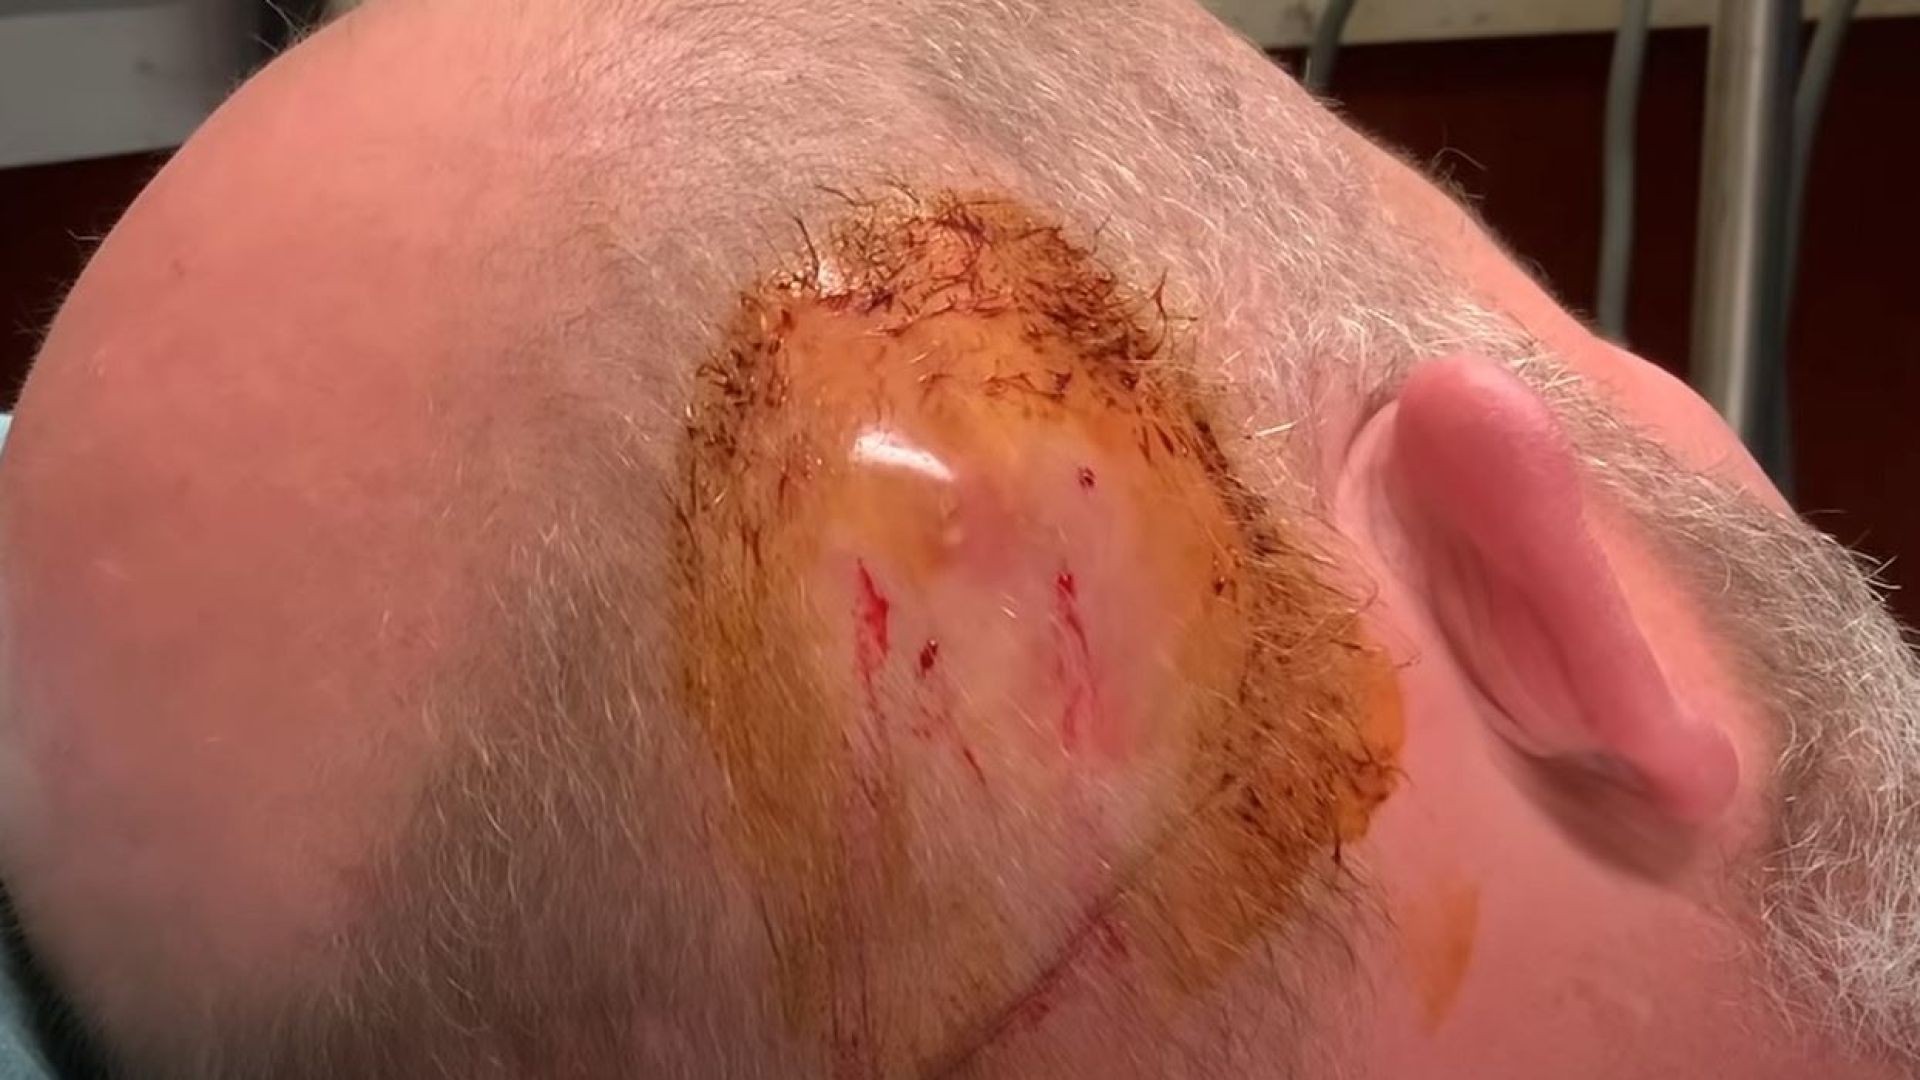 Large scalp infection